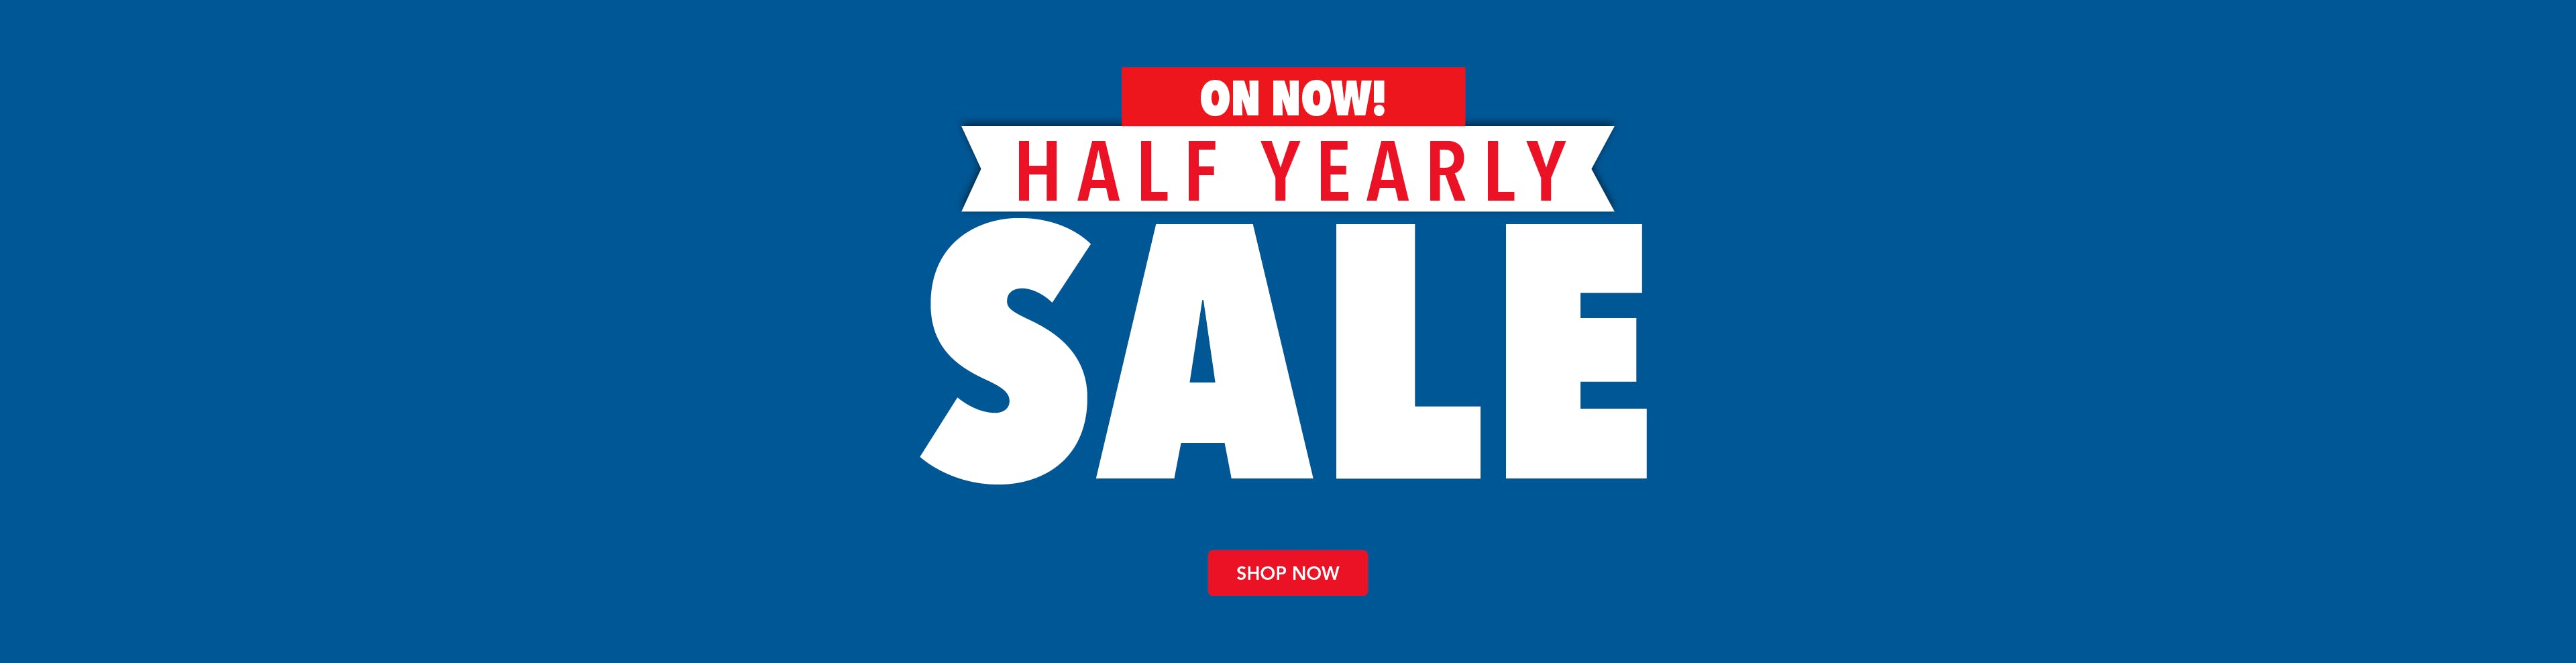 Half Yearly Sale